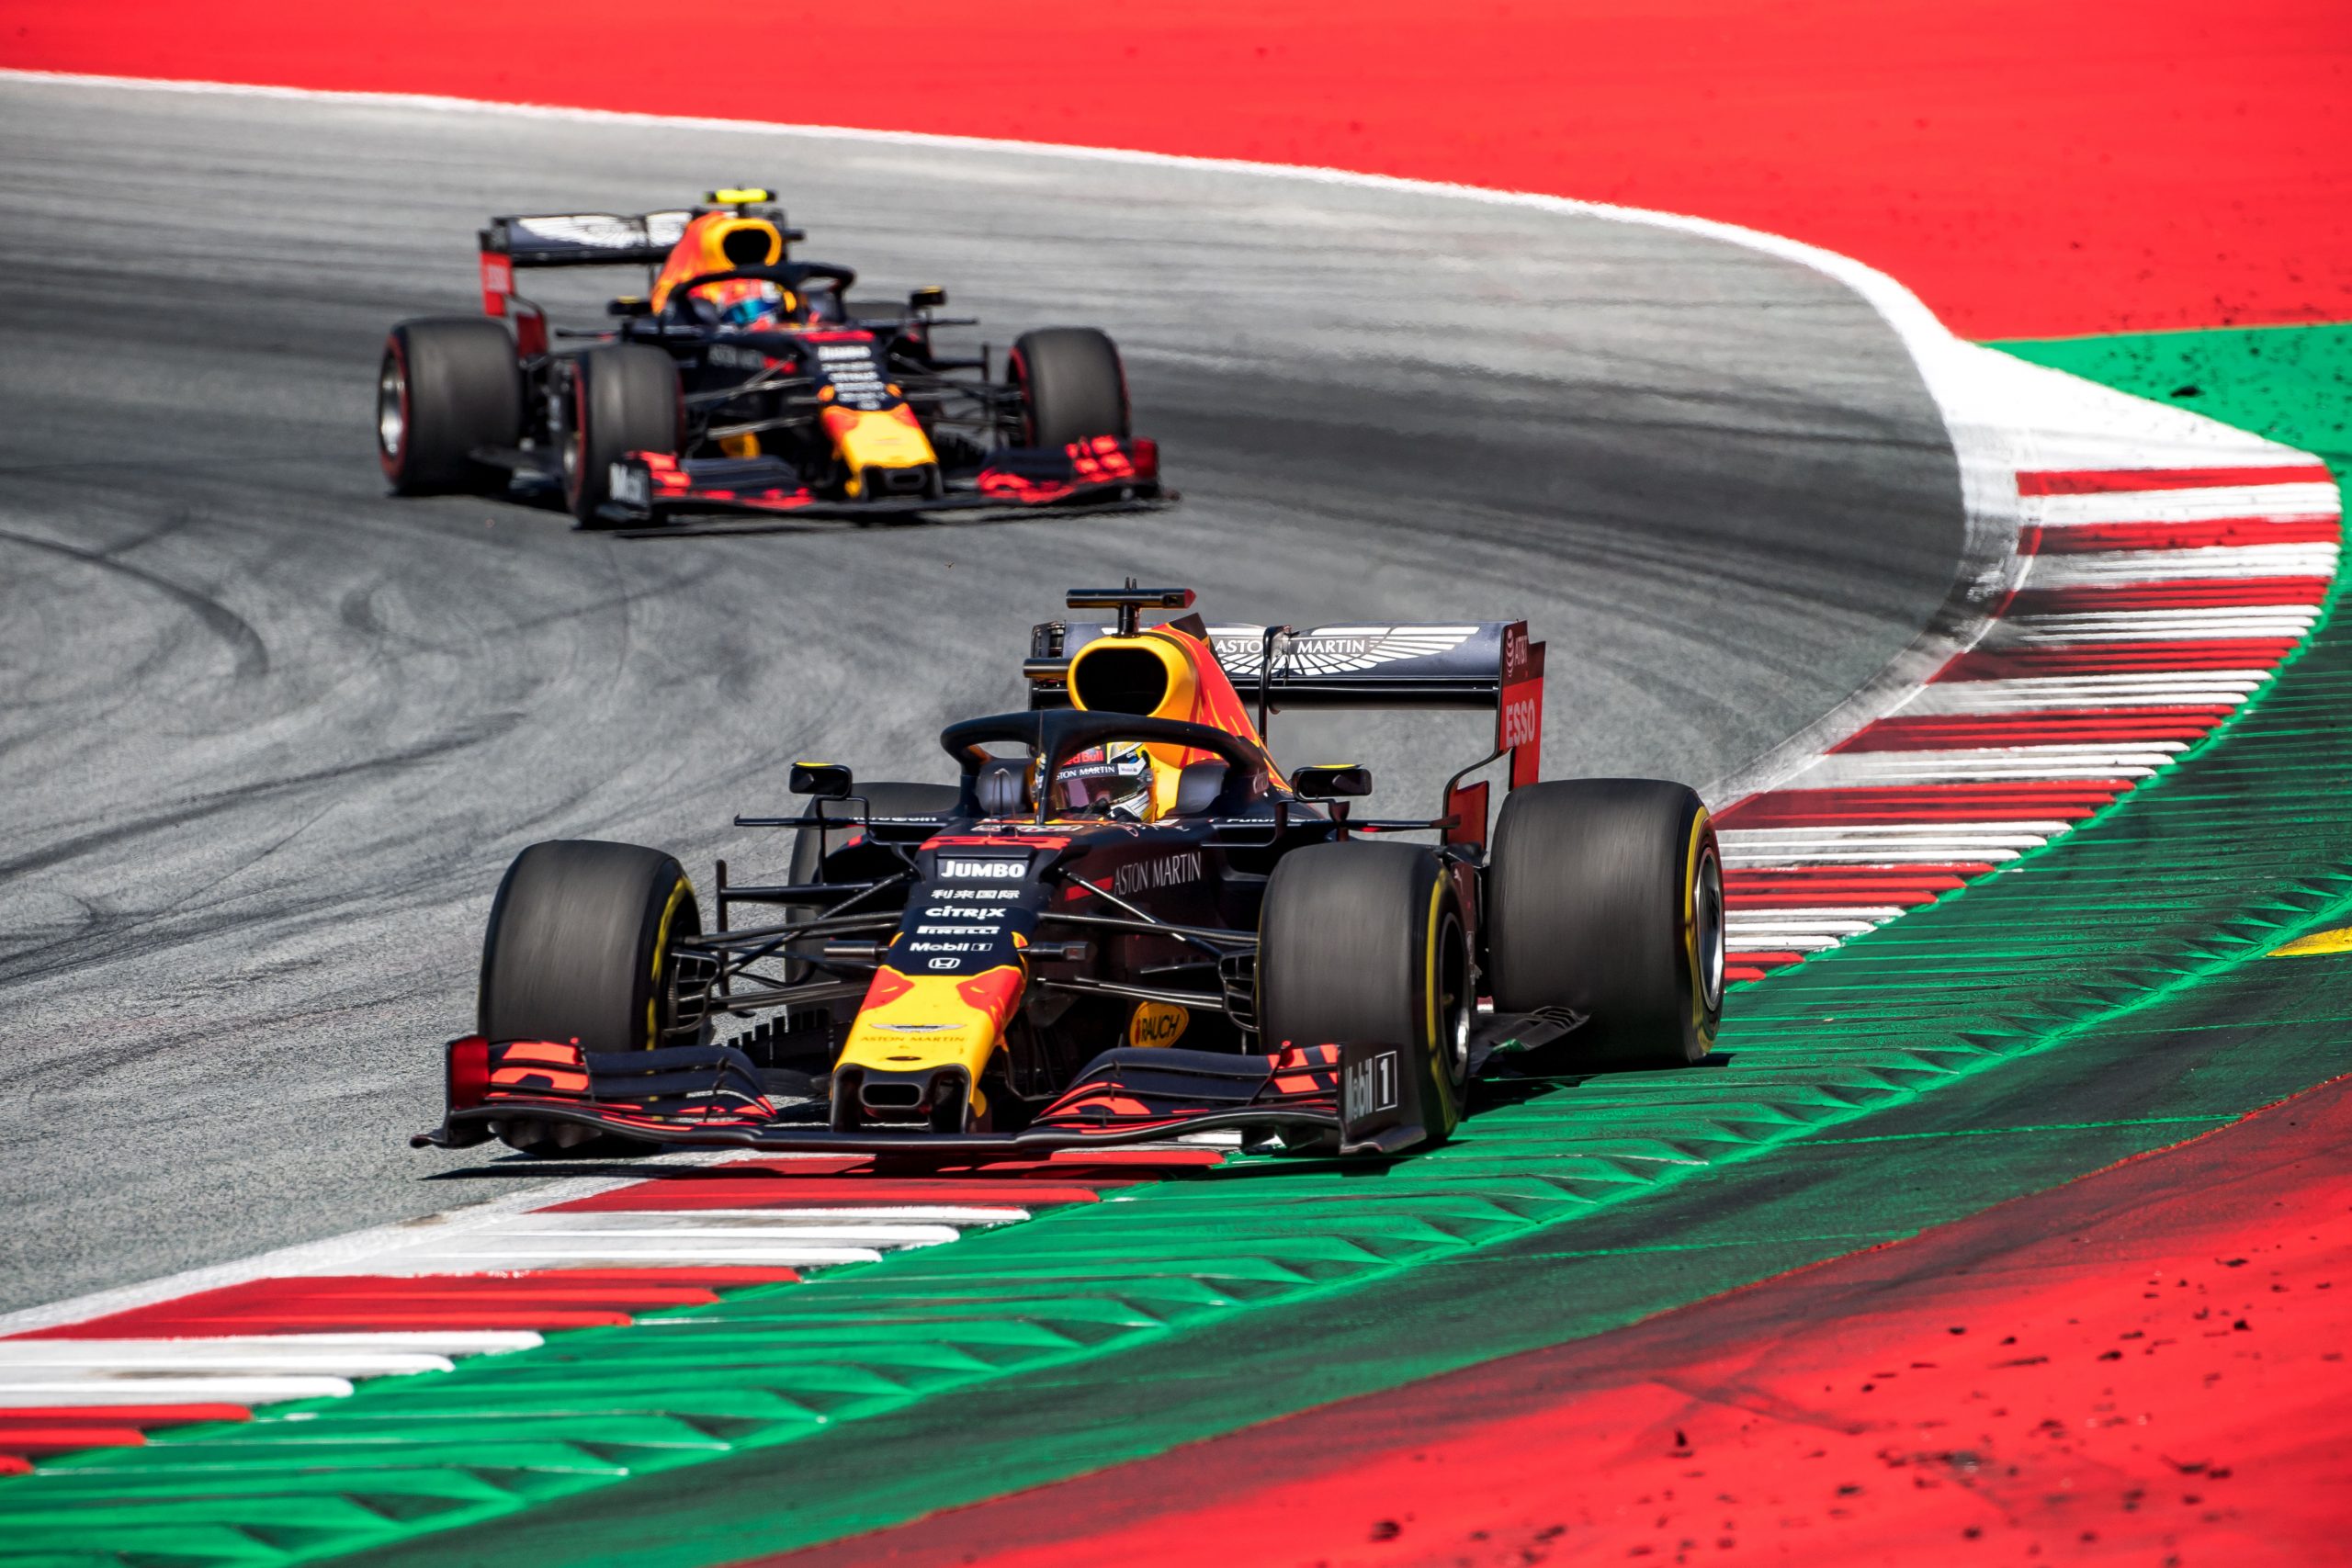 Honda will make Formula One exit in 2021, Red bull disappointed